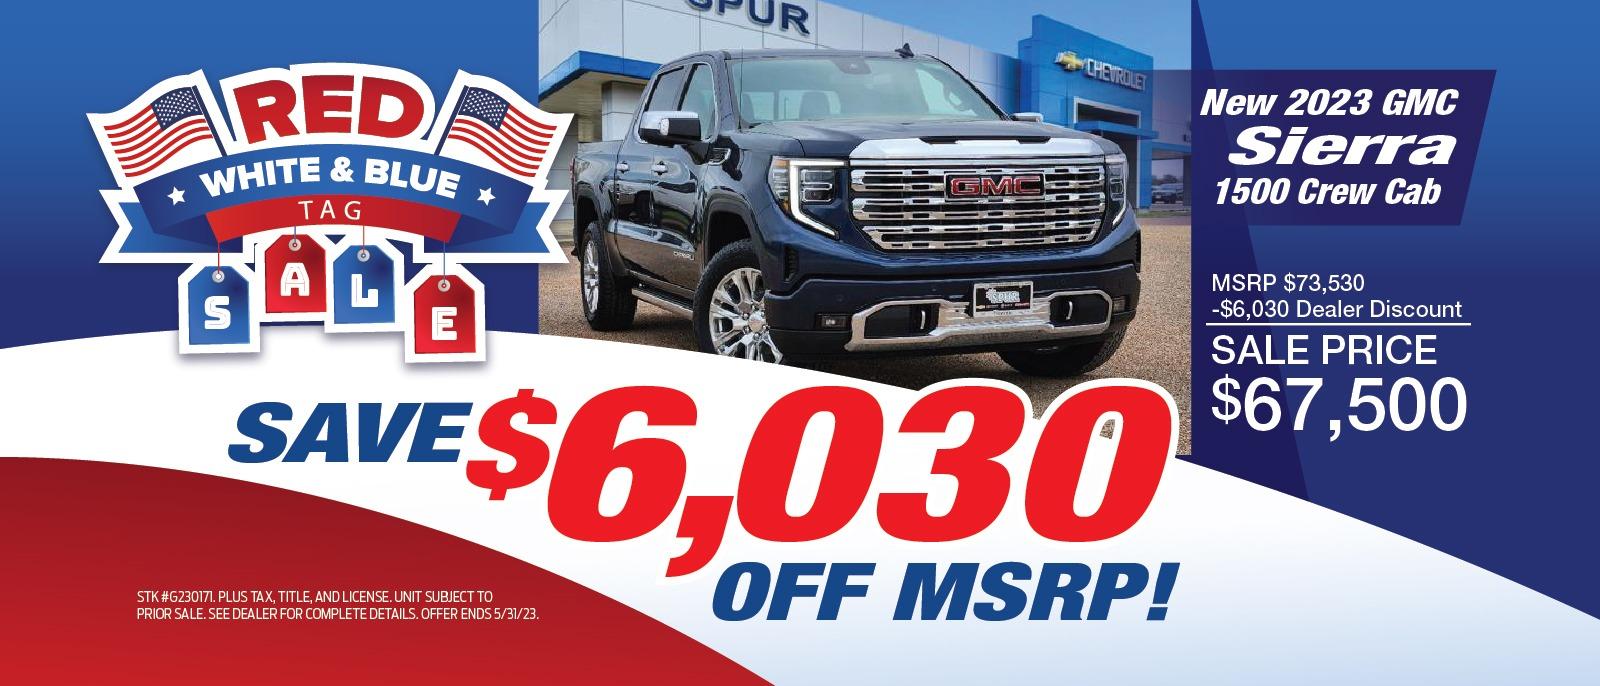 NEW 2023 SIERRA 1500 CREW CAB
SAVE $6,030 OFF MSRP!